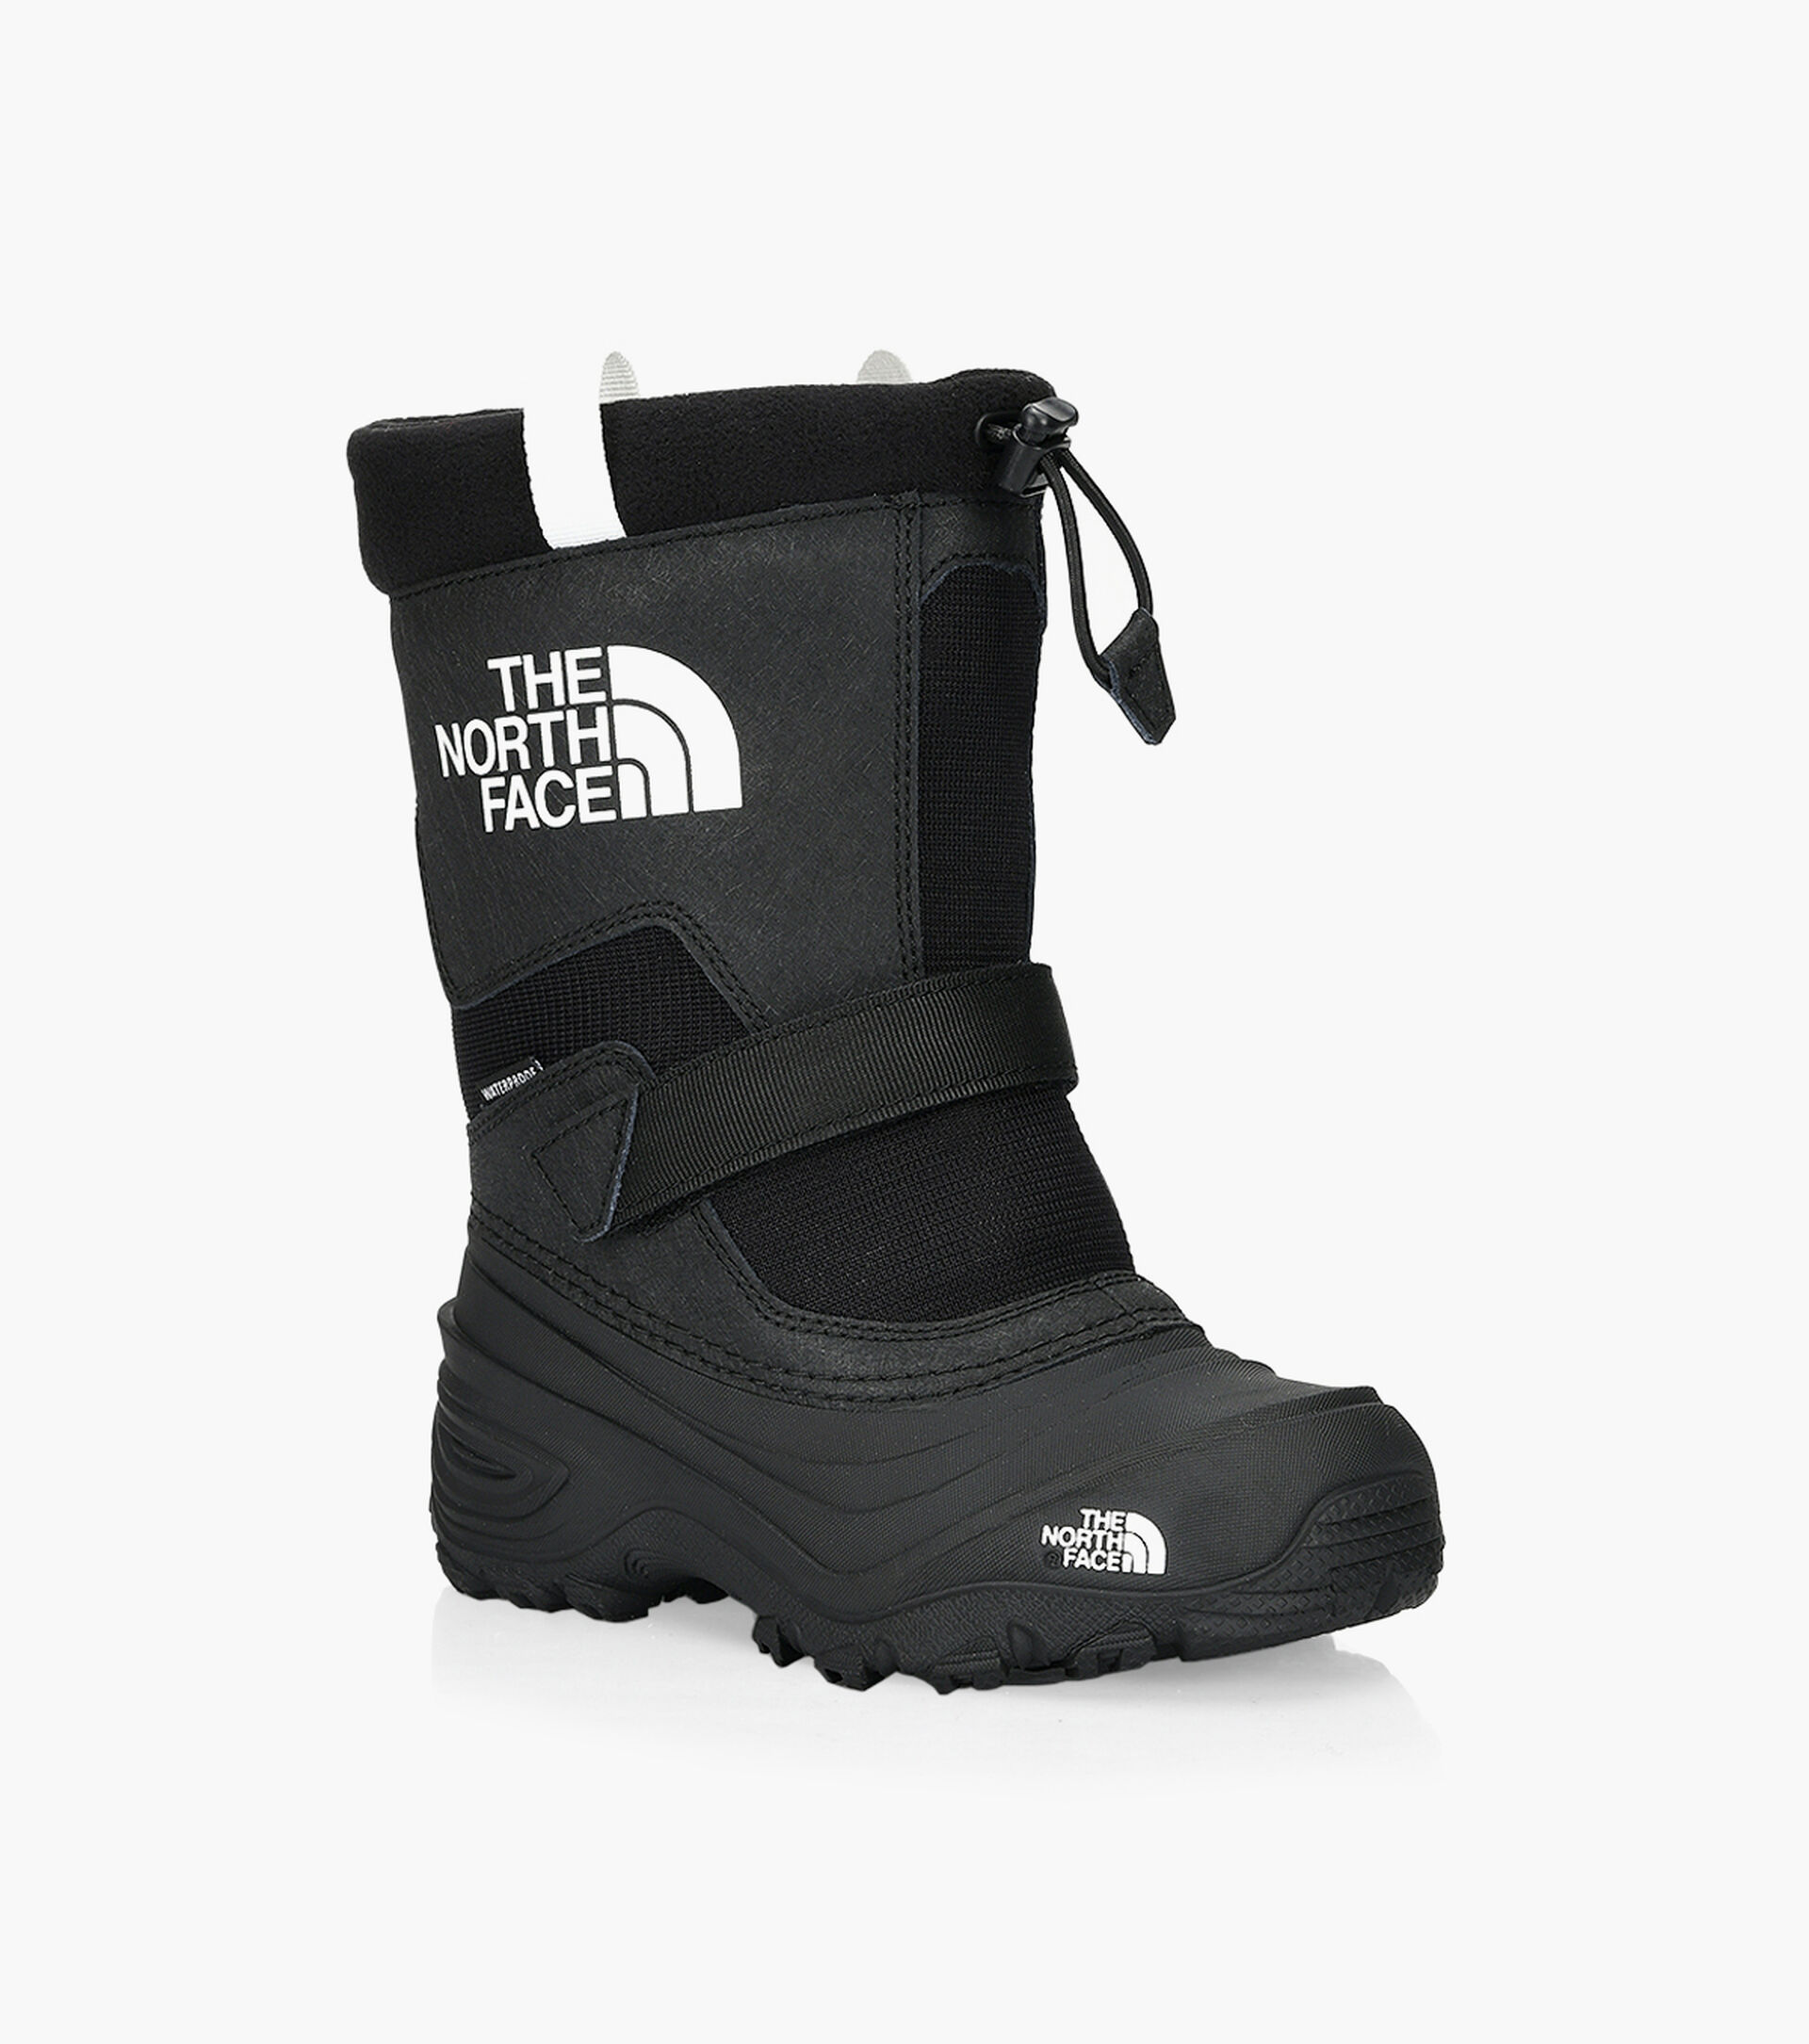 THE NORTH FACE ALPENGLOW EXTREME III - Noir | Browns Shoes